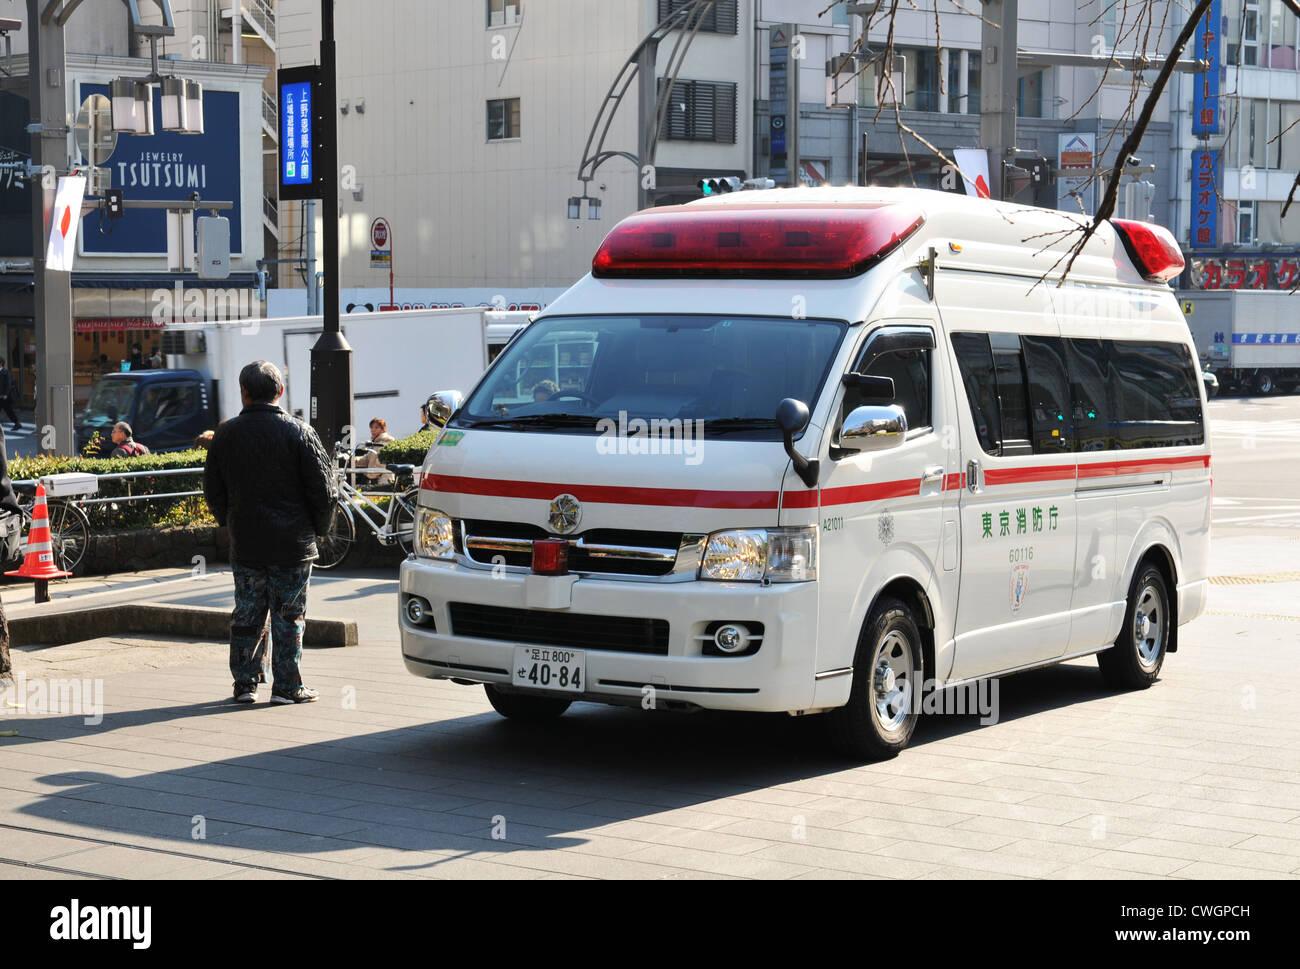 Tokyo, Japan - 28 December, 2011: Ambulance emergency call in Ueno district Stock Photo